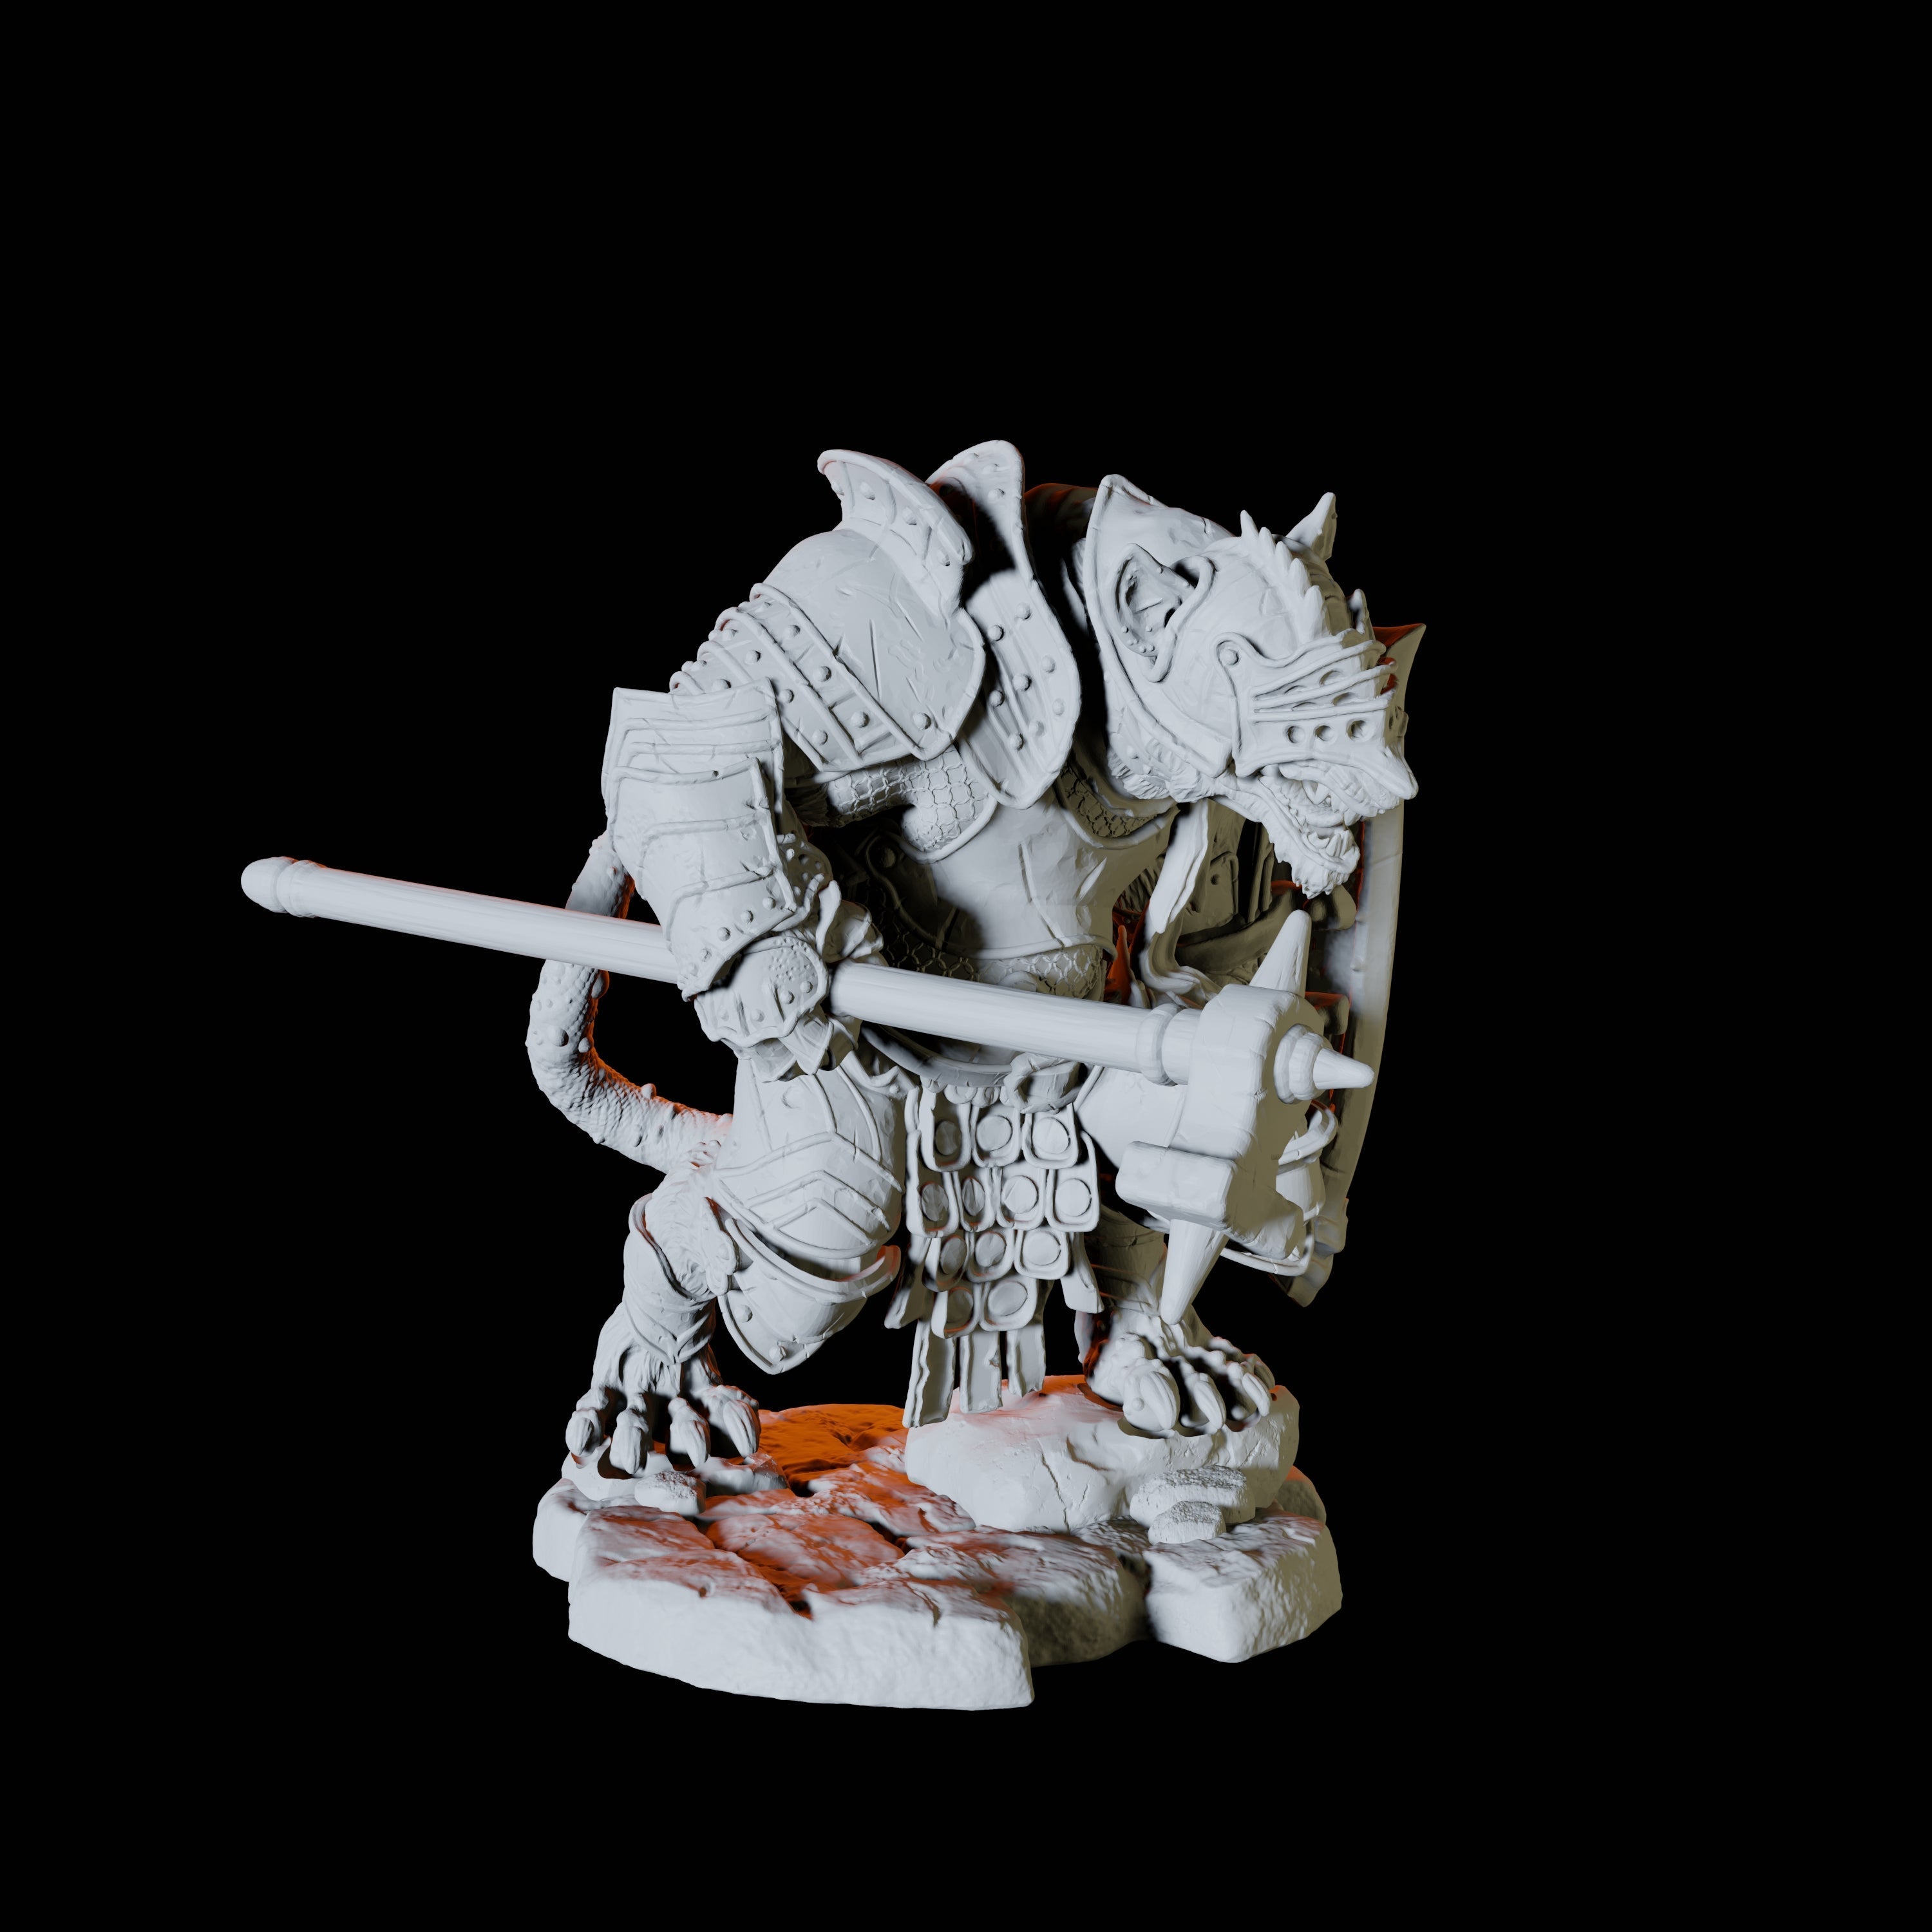 Ratfolk Soldier A Miniature for Dungeons and Dragons, Pathfinder or other TTRPGs